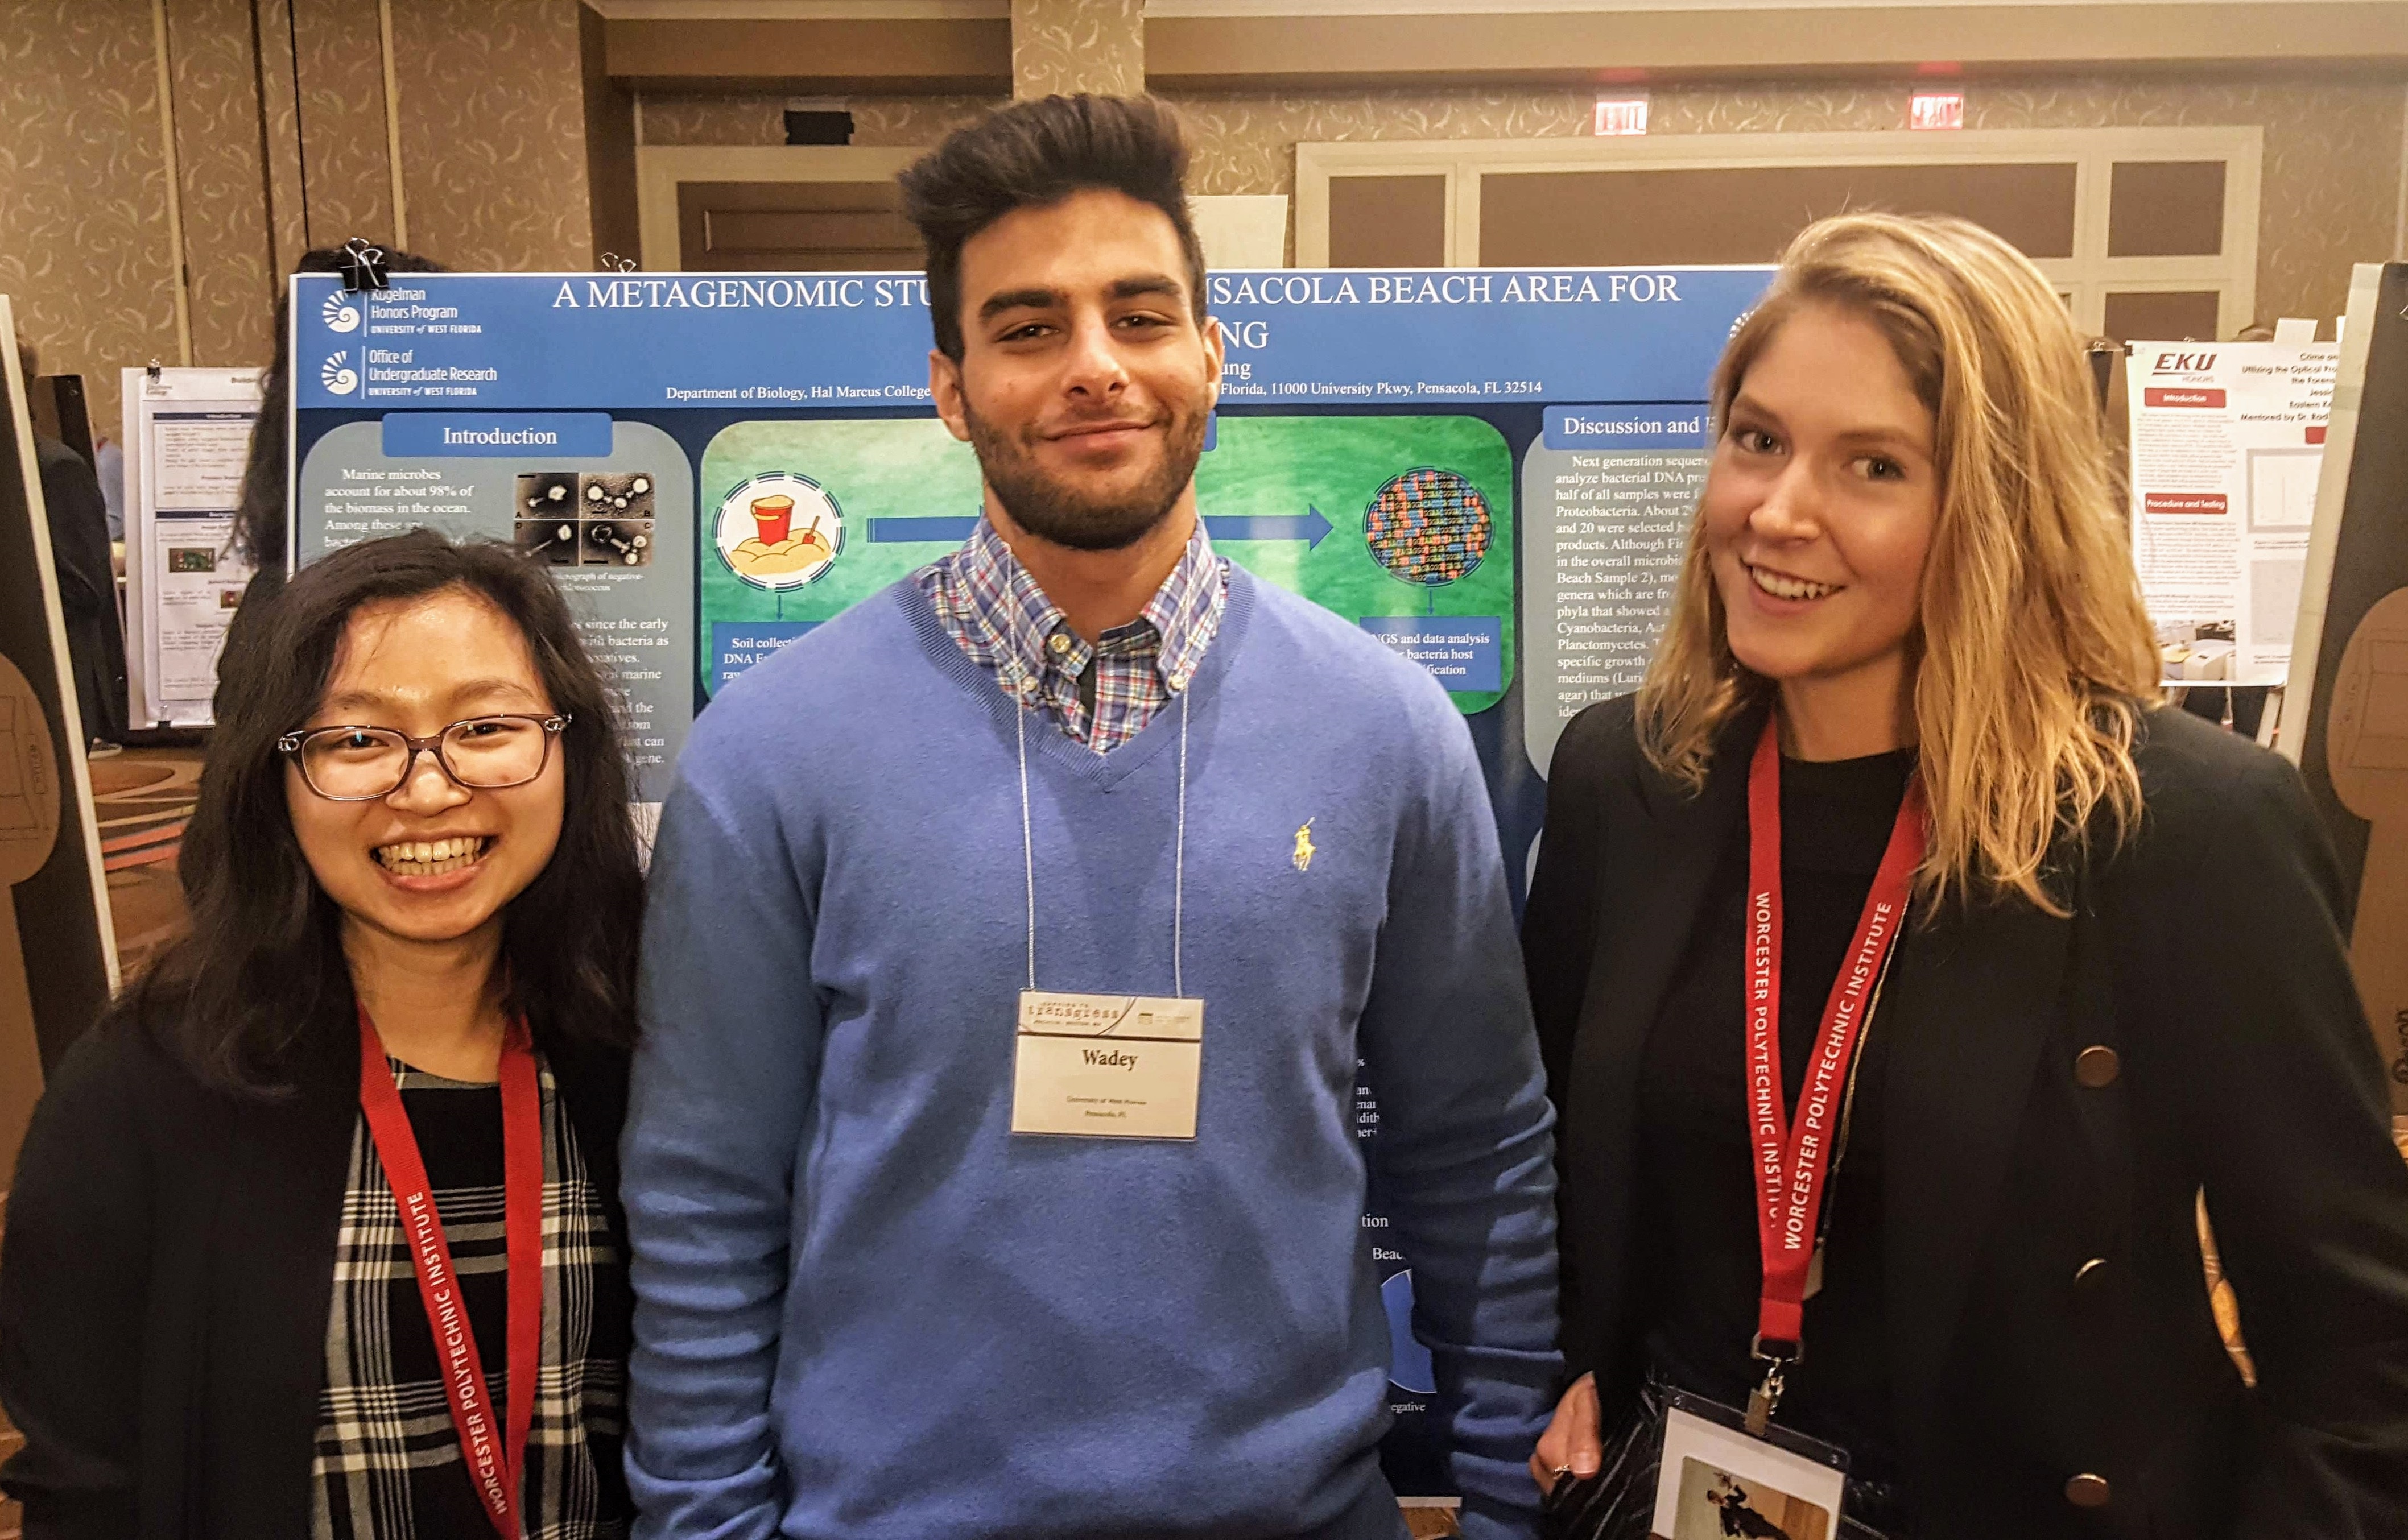 Student presenters at NCHC 2018